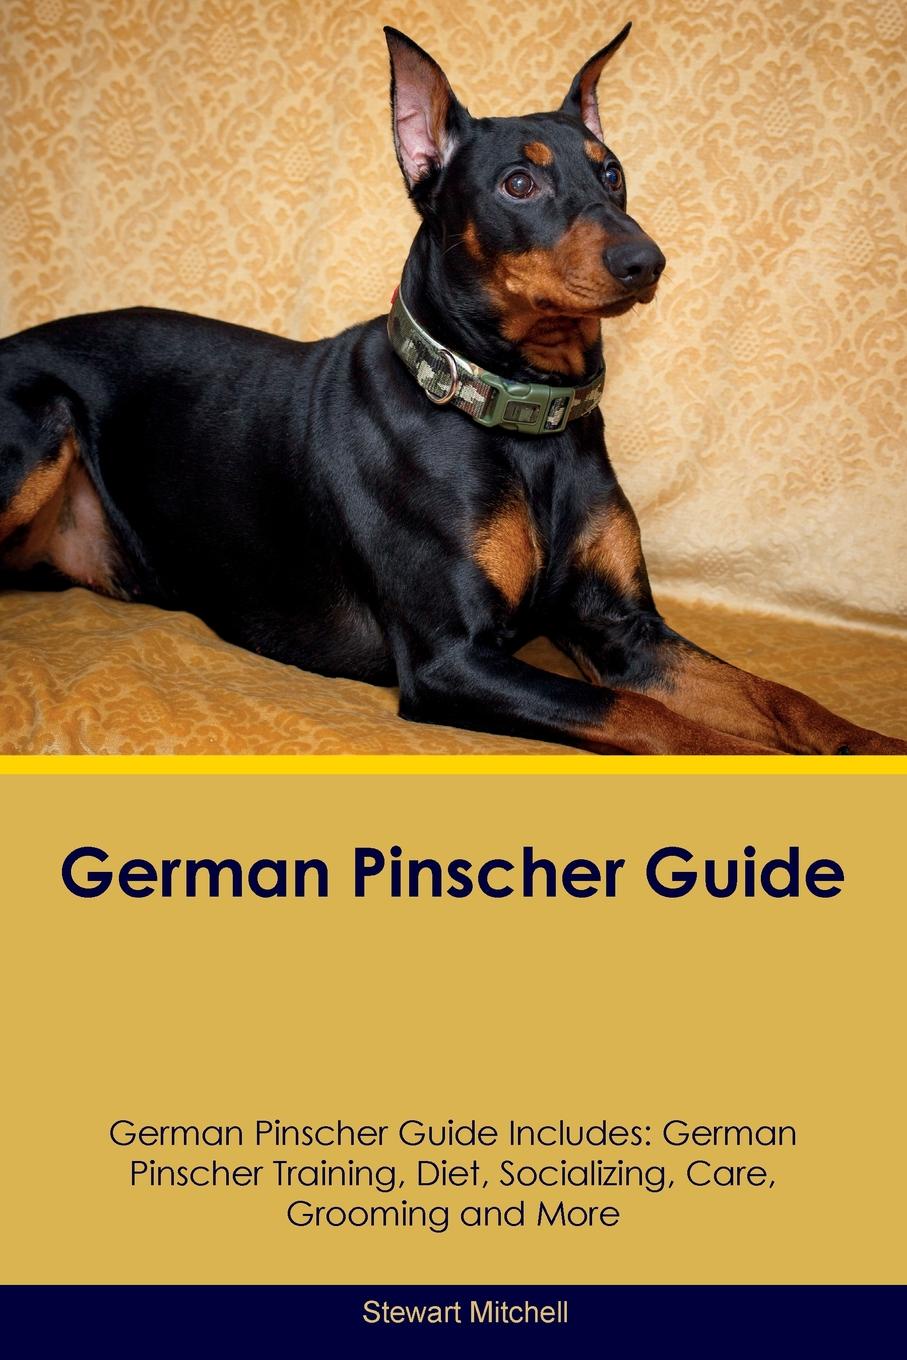 German Pinscher Guide German Pinscher Guide Includes. German Pinscher Training, Diet, Socializing, Care, Grooming, Breeding and More